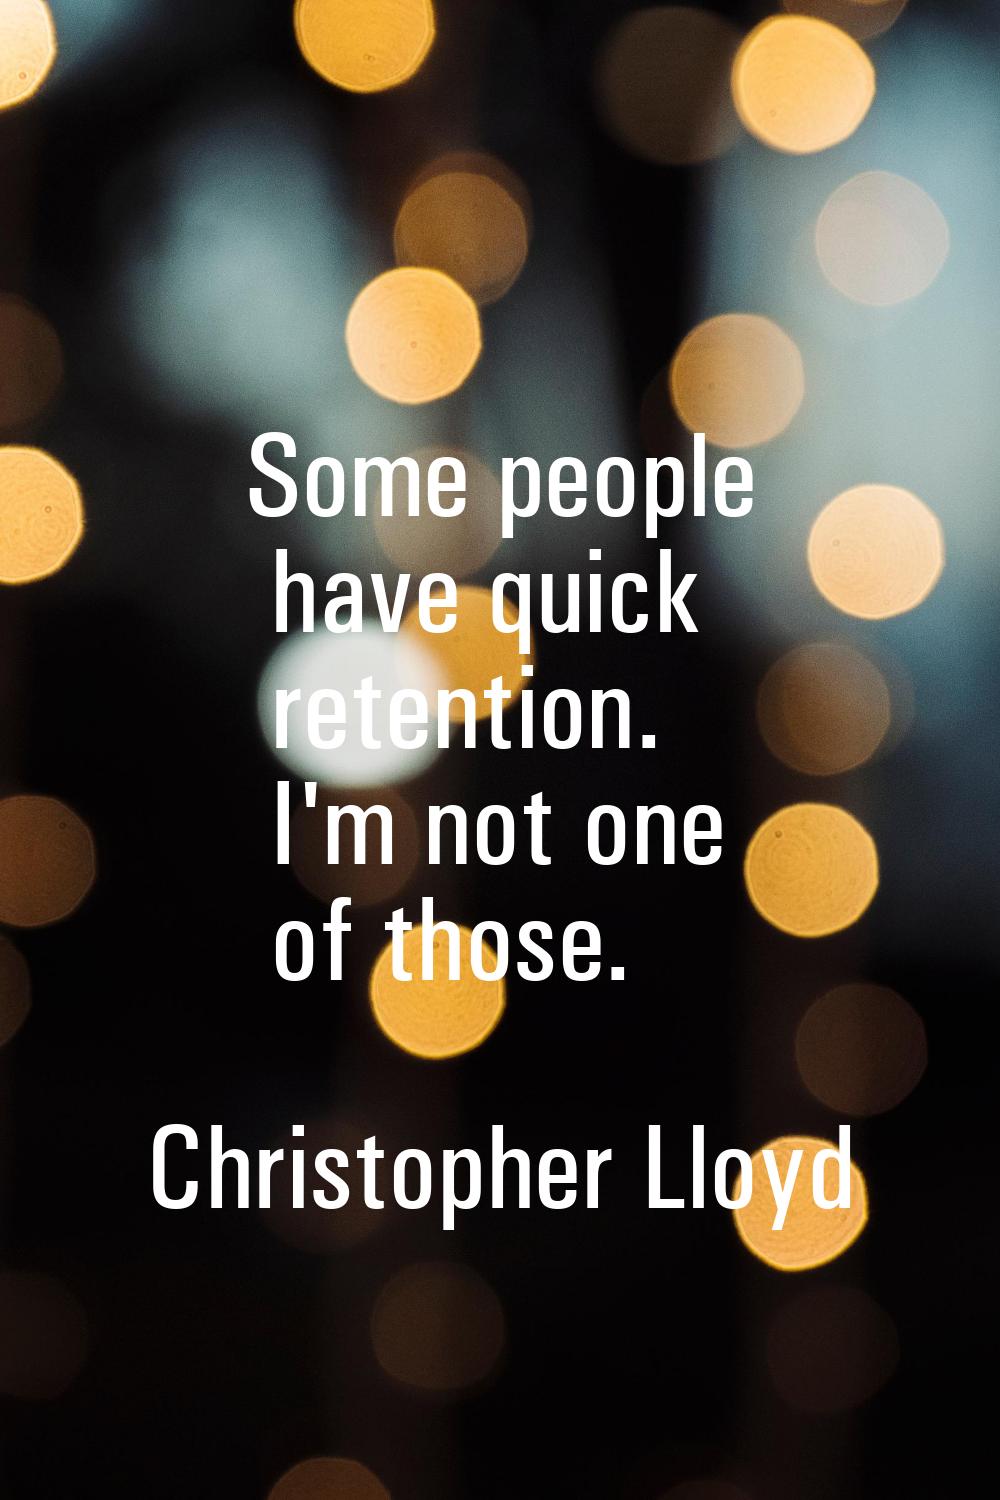 Some people have quick retention. I'm not one of those.